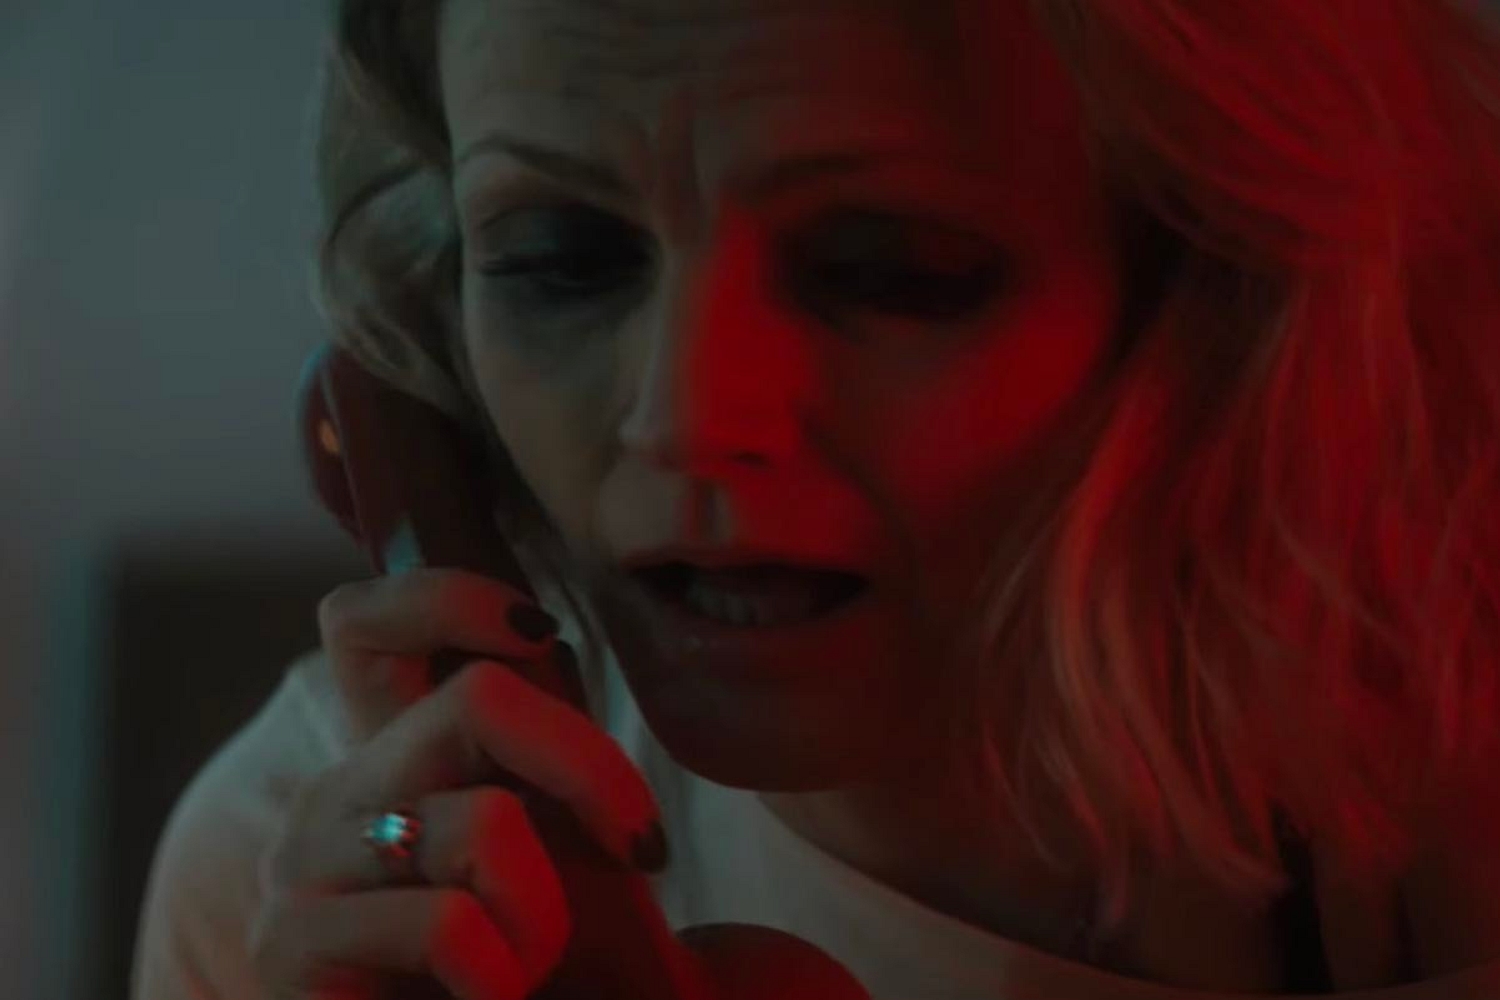 Maxine Peake guests in Ex:Re’s video for ‘The Dazzler’